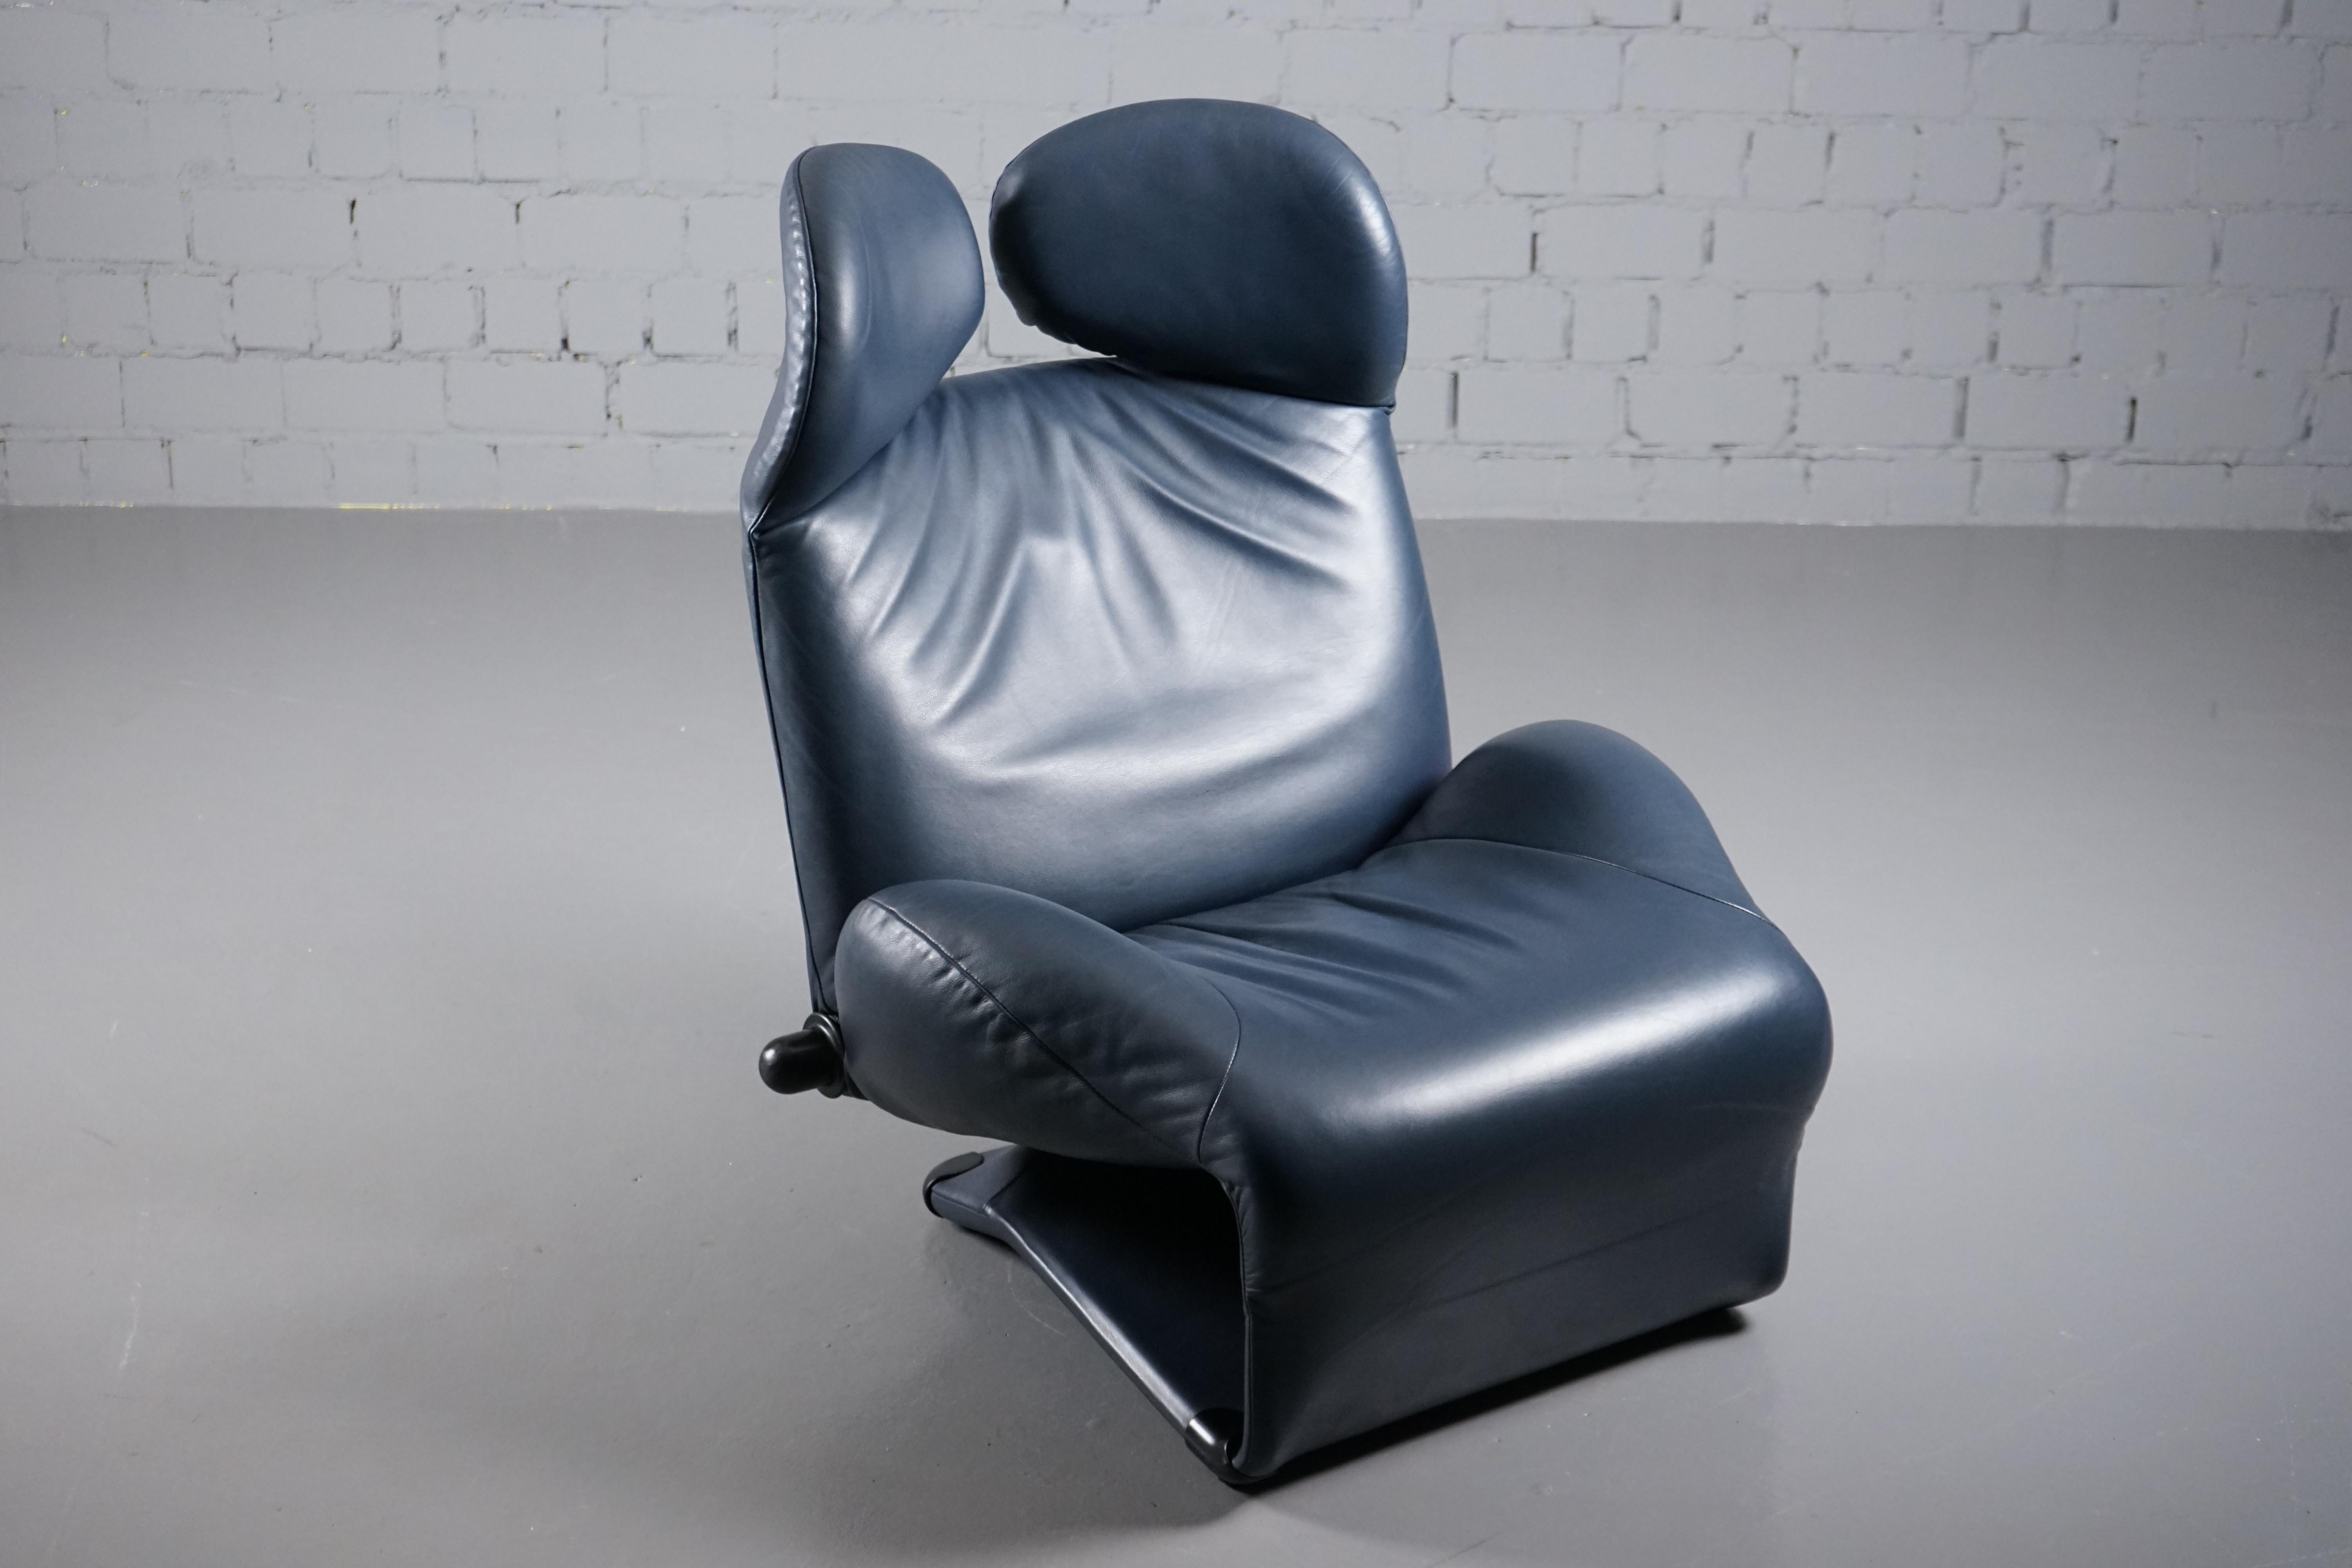 Grey-Blue Leather Wink Lounge Chair by Toshiyuki Kita for Cassina, 1980s For Sale 11